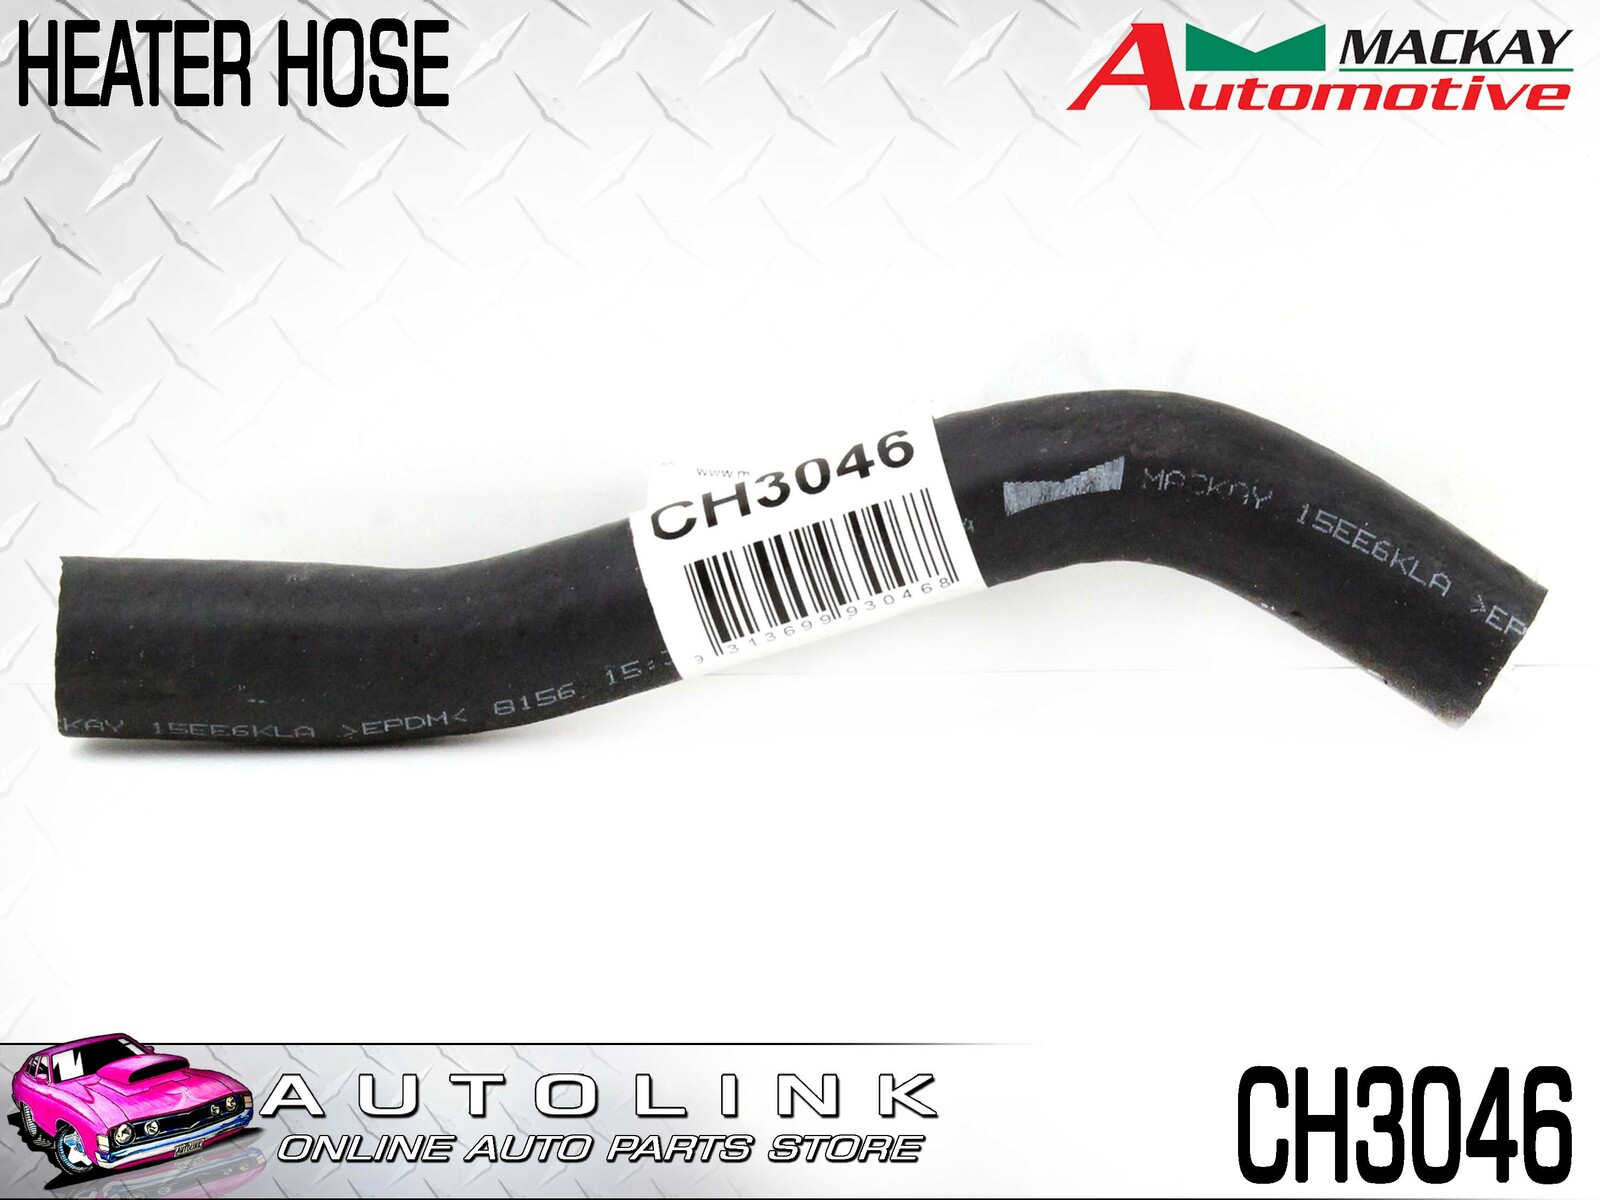 MACKAY CH1666 HEATER HOSE 1160mm LONG FOR FORD FALCON XD XE 302 351 V8